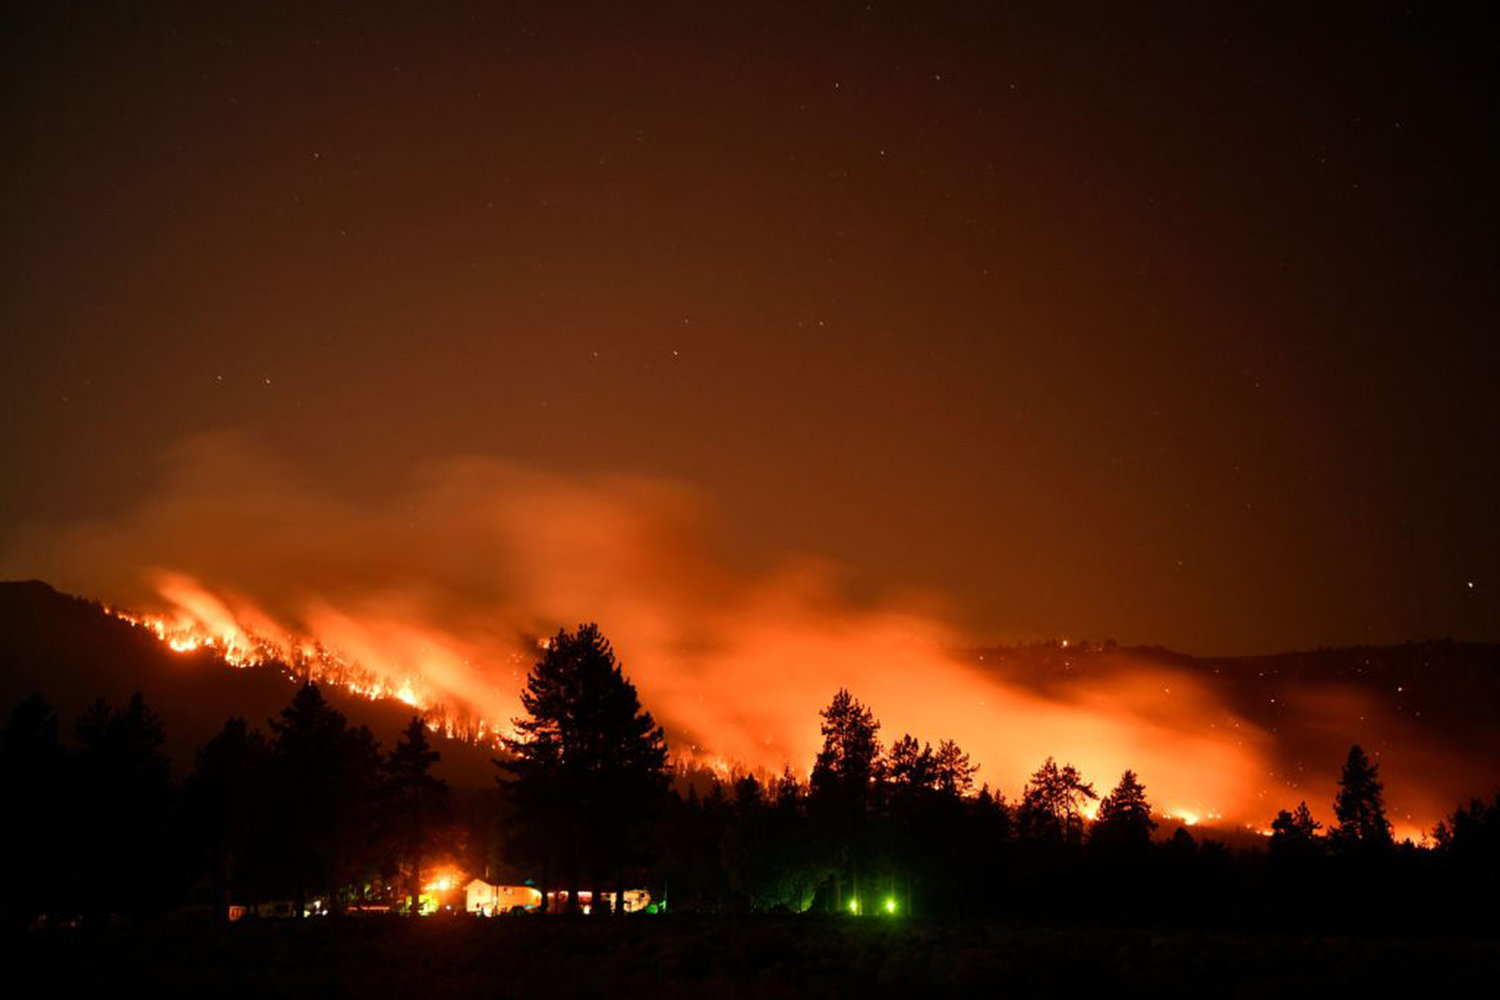 In this long exposure picture trees burn on a hillside behind Honey Lake campground during the Dixie Fire on August 18, 2021 in Milford, California. - The wildfire in Northern California continues to grow, burning over 626,000 acres according to CalFire. (Patrick T. Fallon/AFP via Getty Images/TNS)